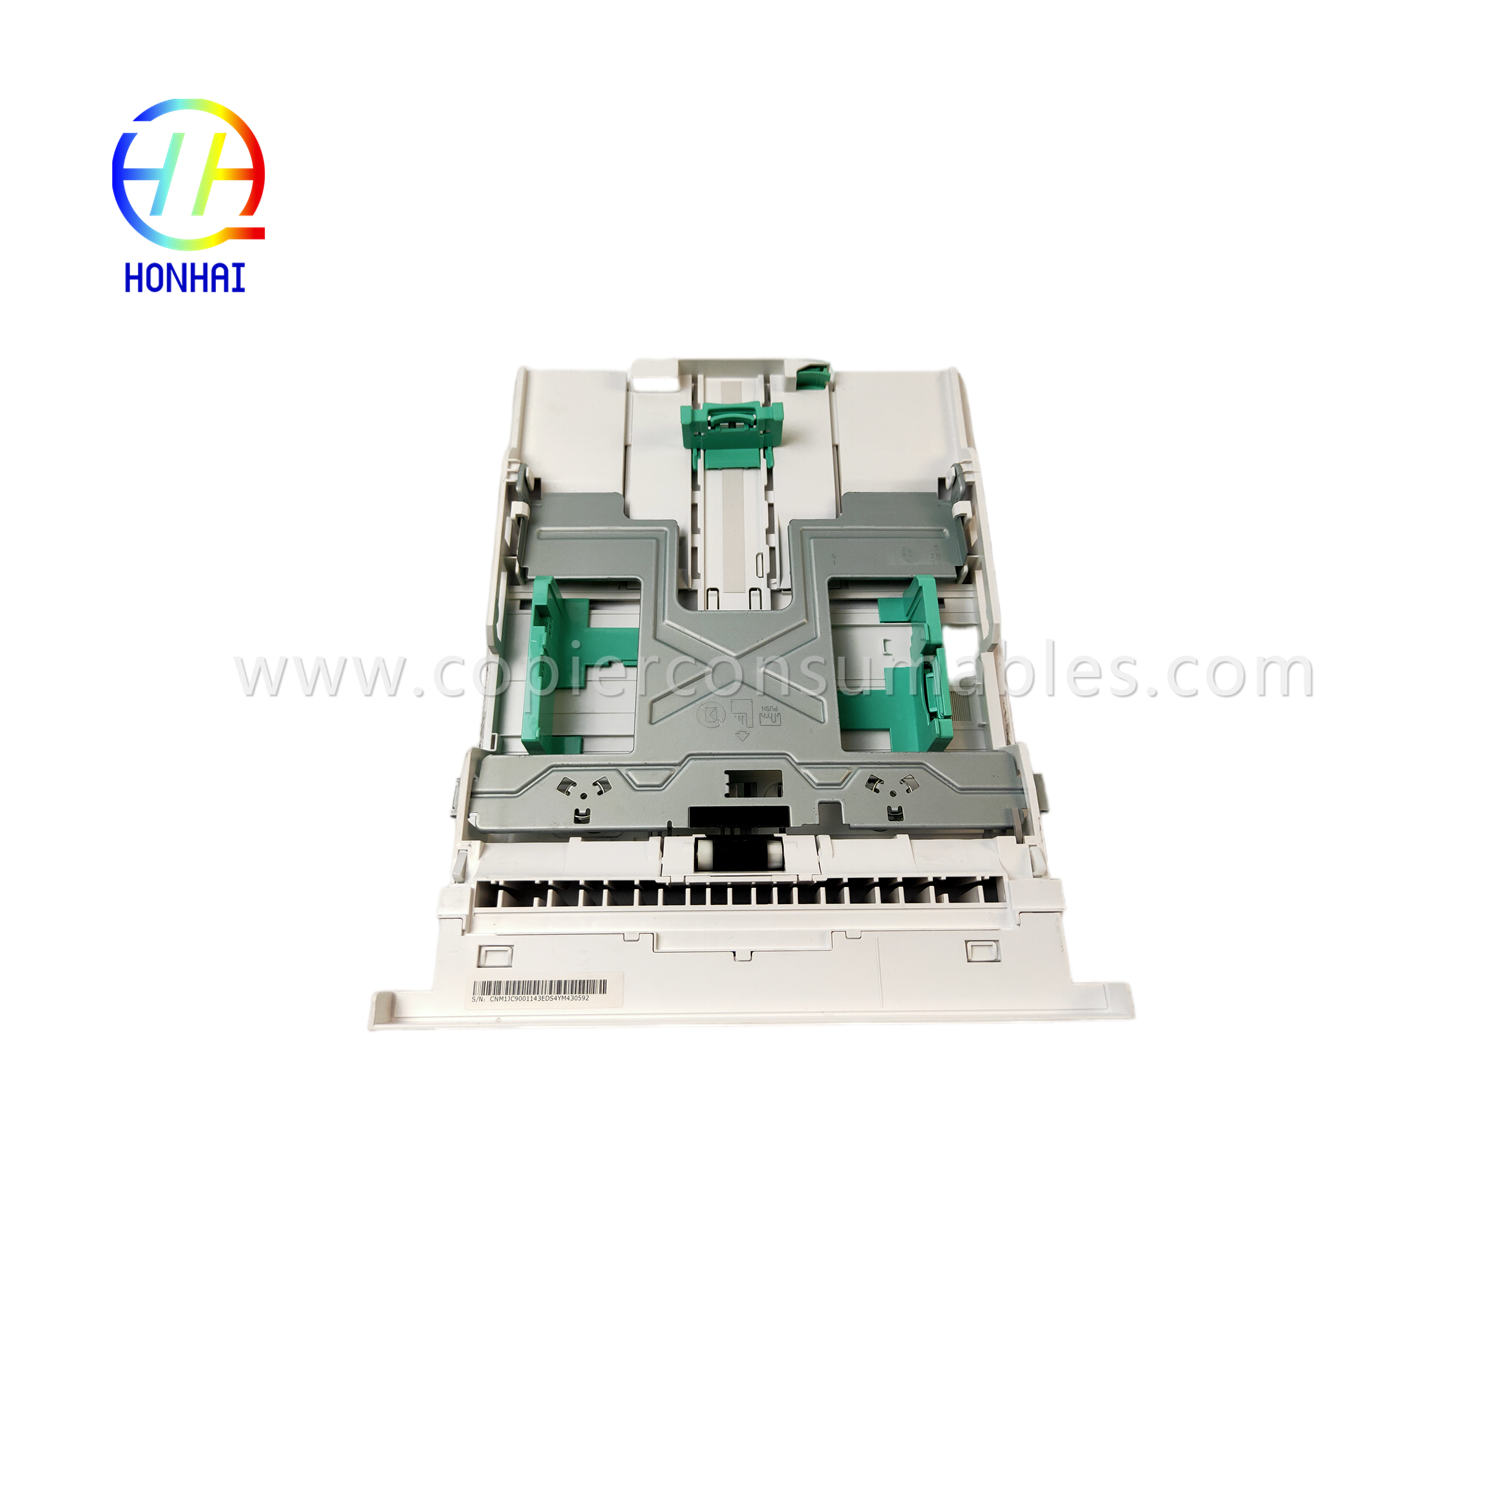 https://c585.goodao.net/paper-tray-assemble-for-xerox-phaser-3320dni-workcentre-3315dn-3325dni-050n00650-cassette-paper-tray-product/